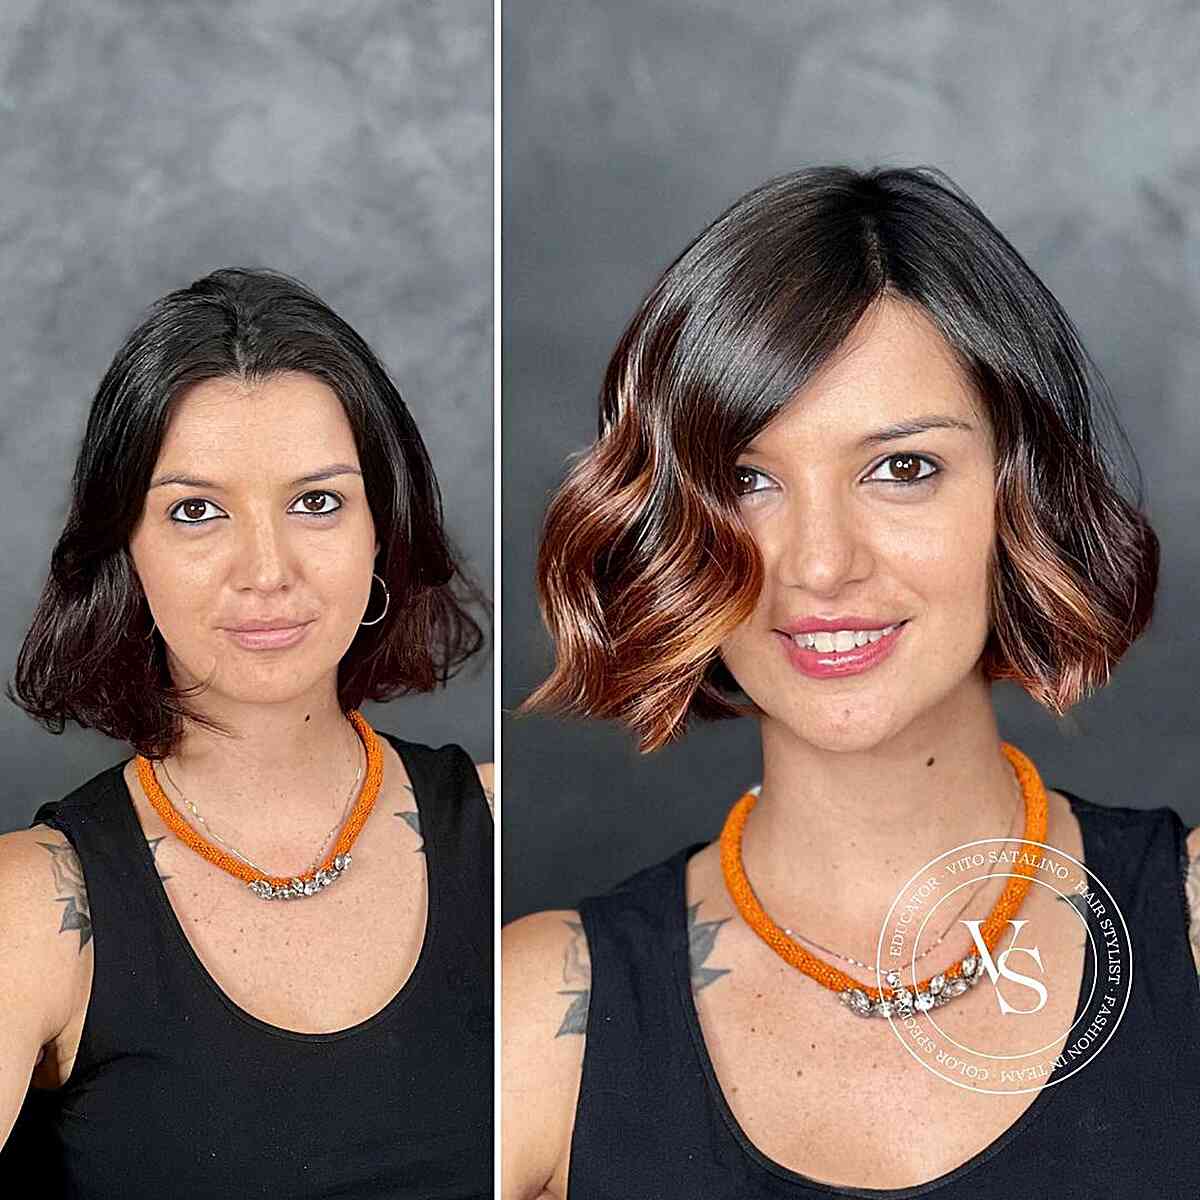 Cute Above-the-Shoulder Bob Cut with Ombre Coloring